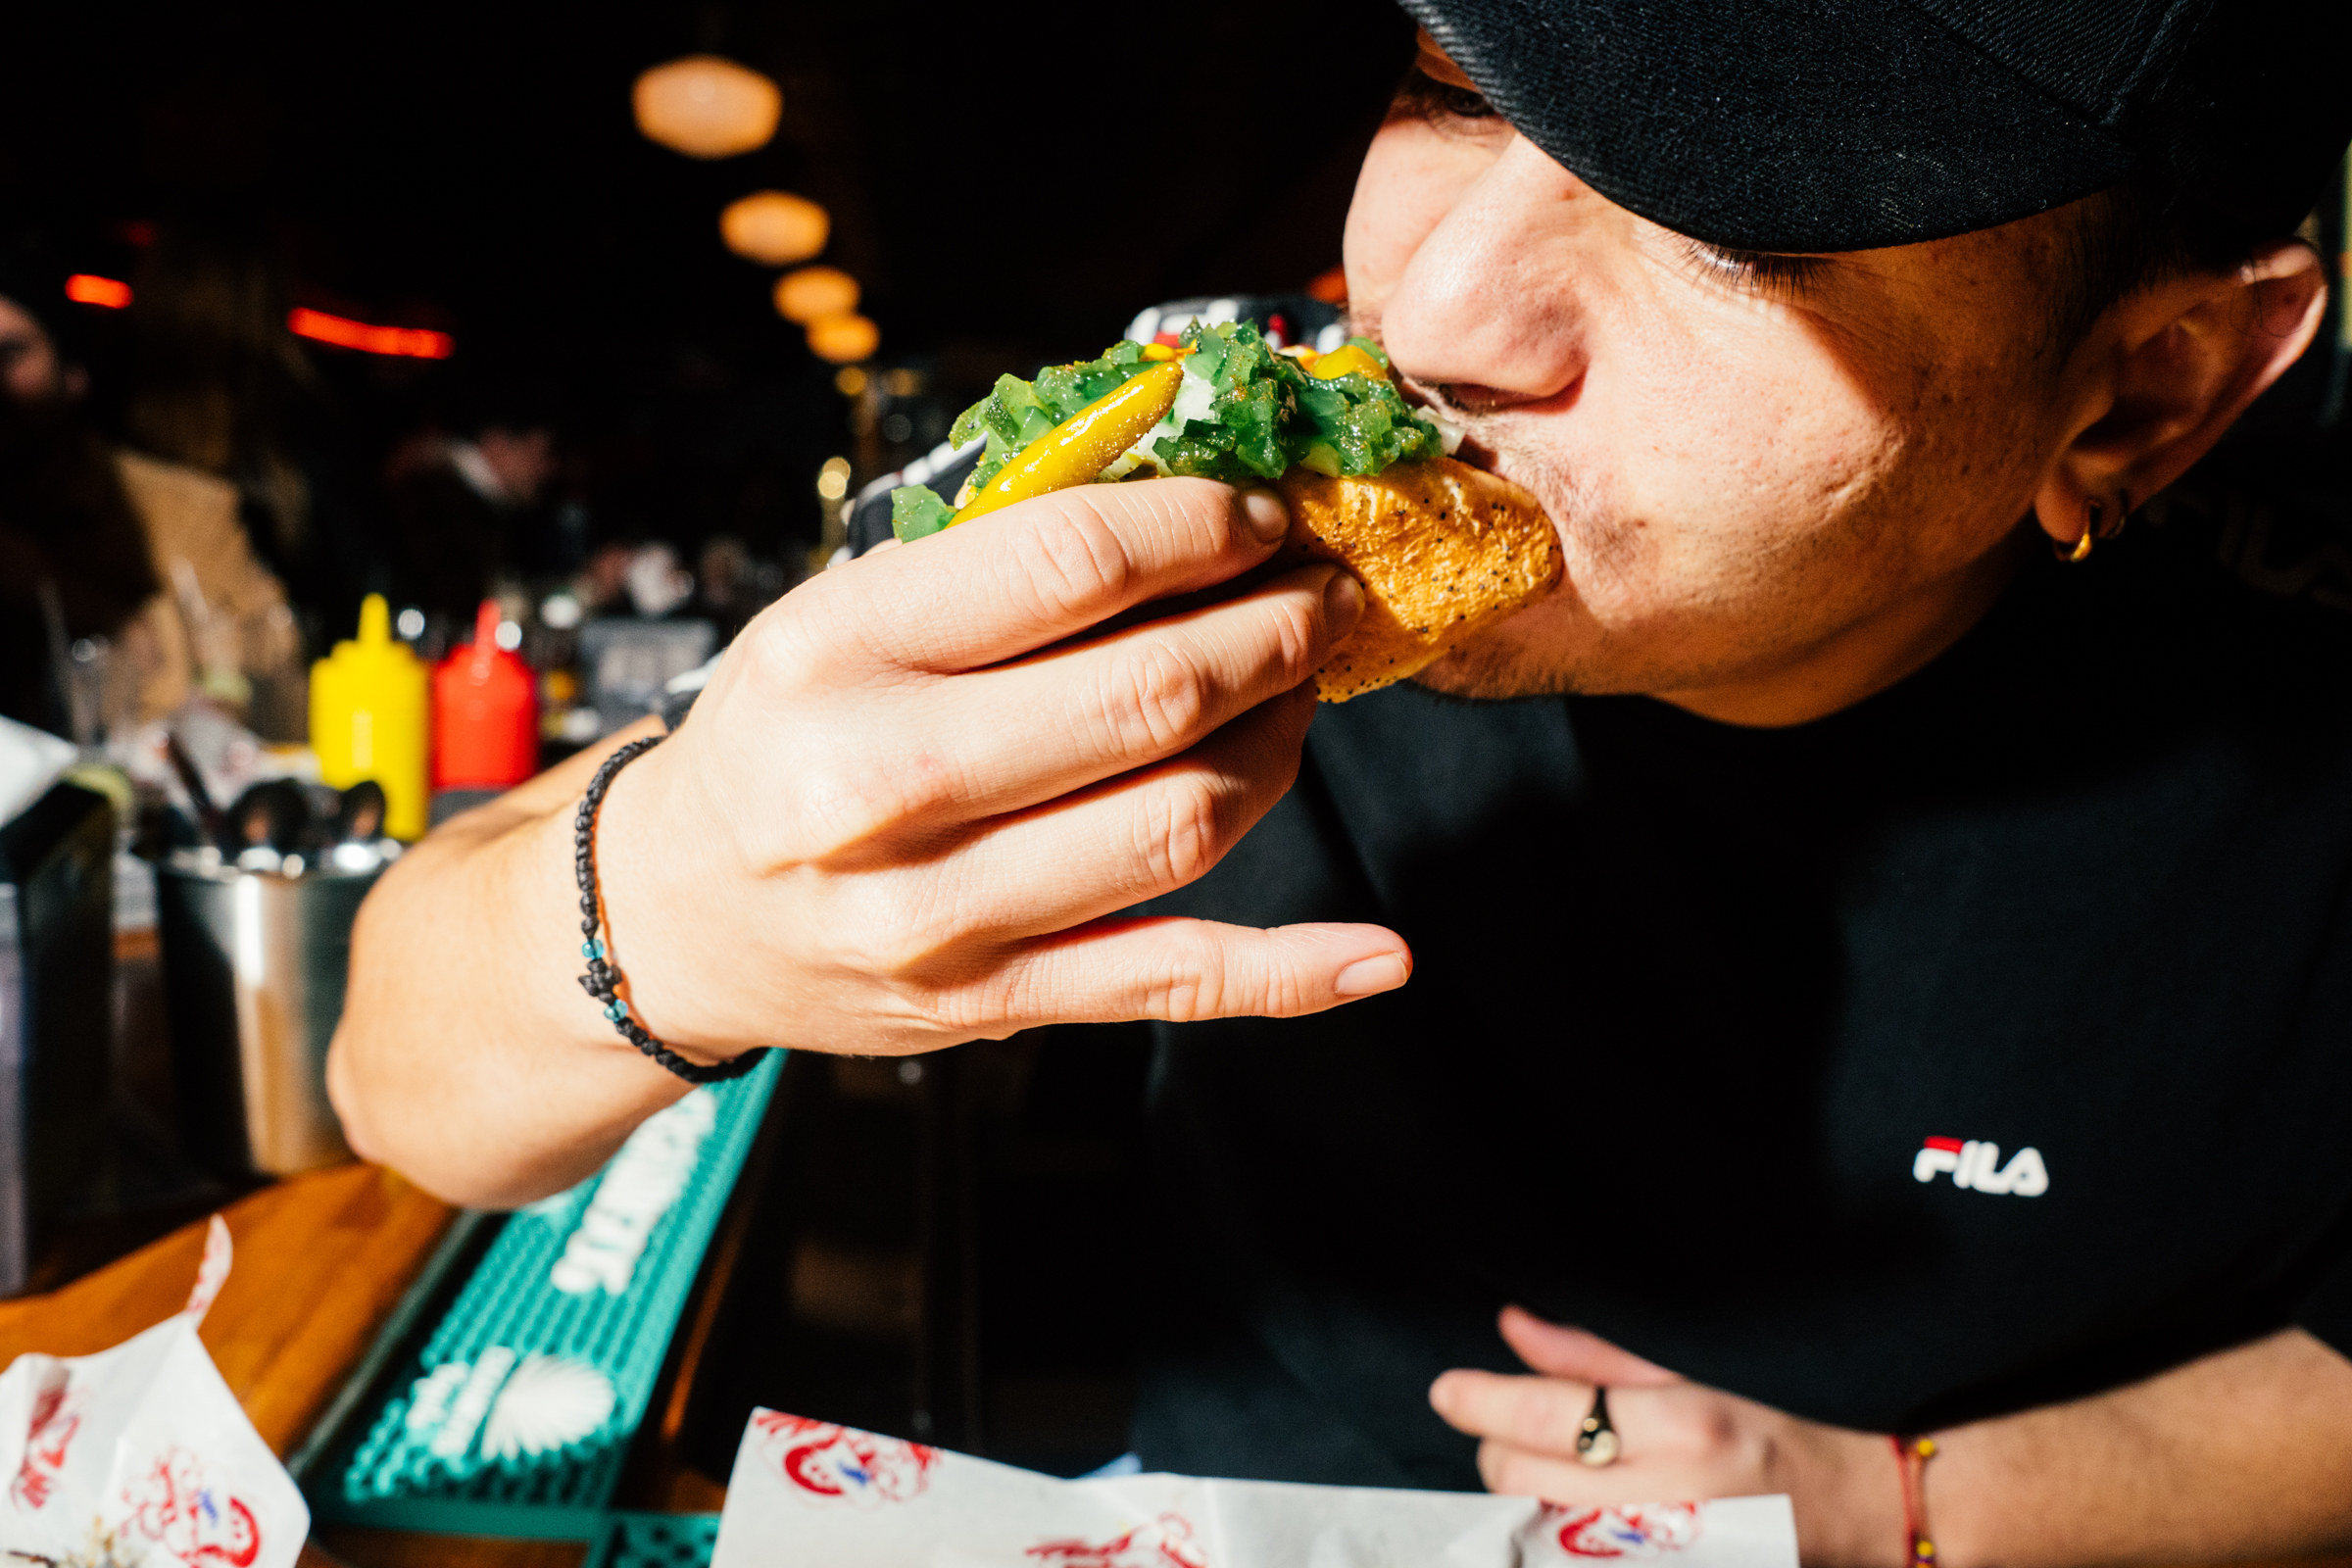 An employee at a bar takes a bite of a Chicago-style hot dog with relish and sport peppers.